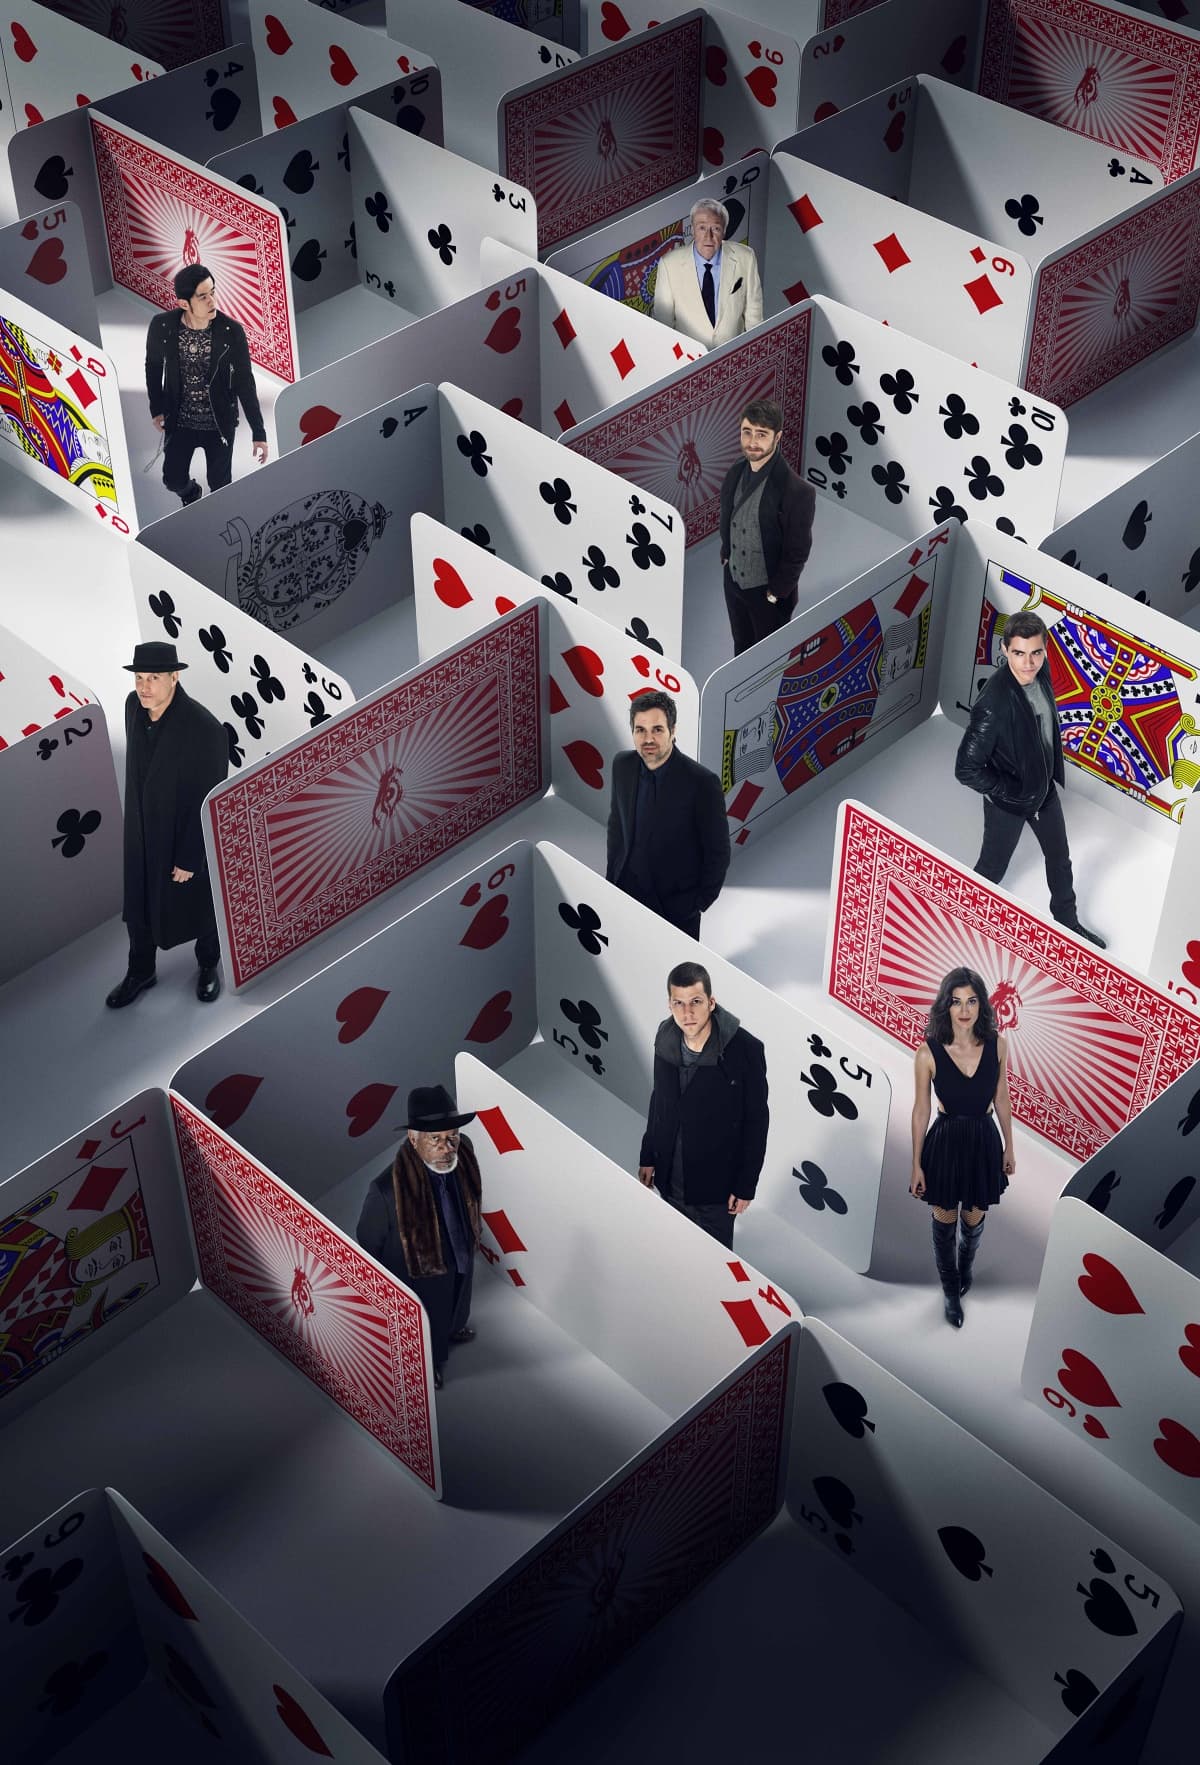 Promotional art for the 2016 heist thriller film Now You See Me 2